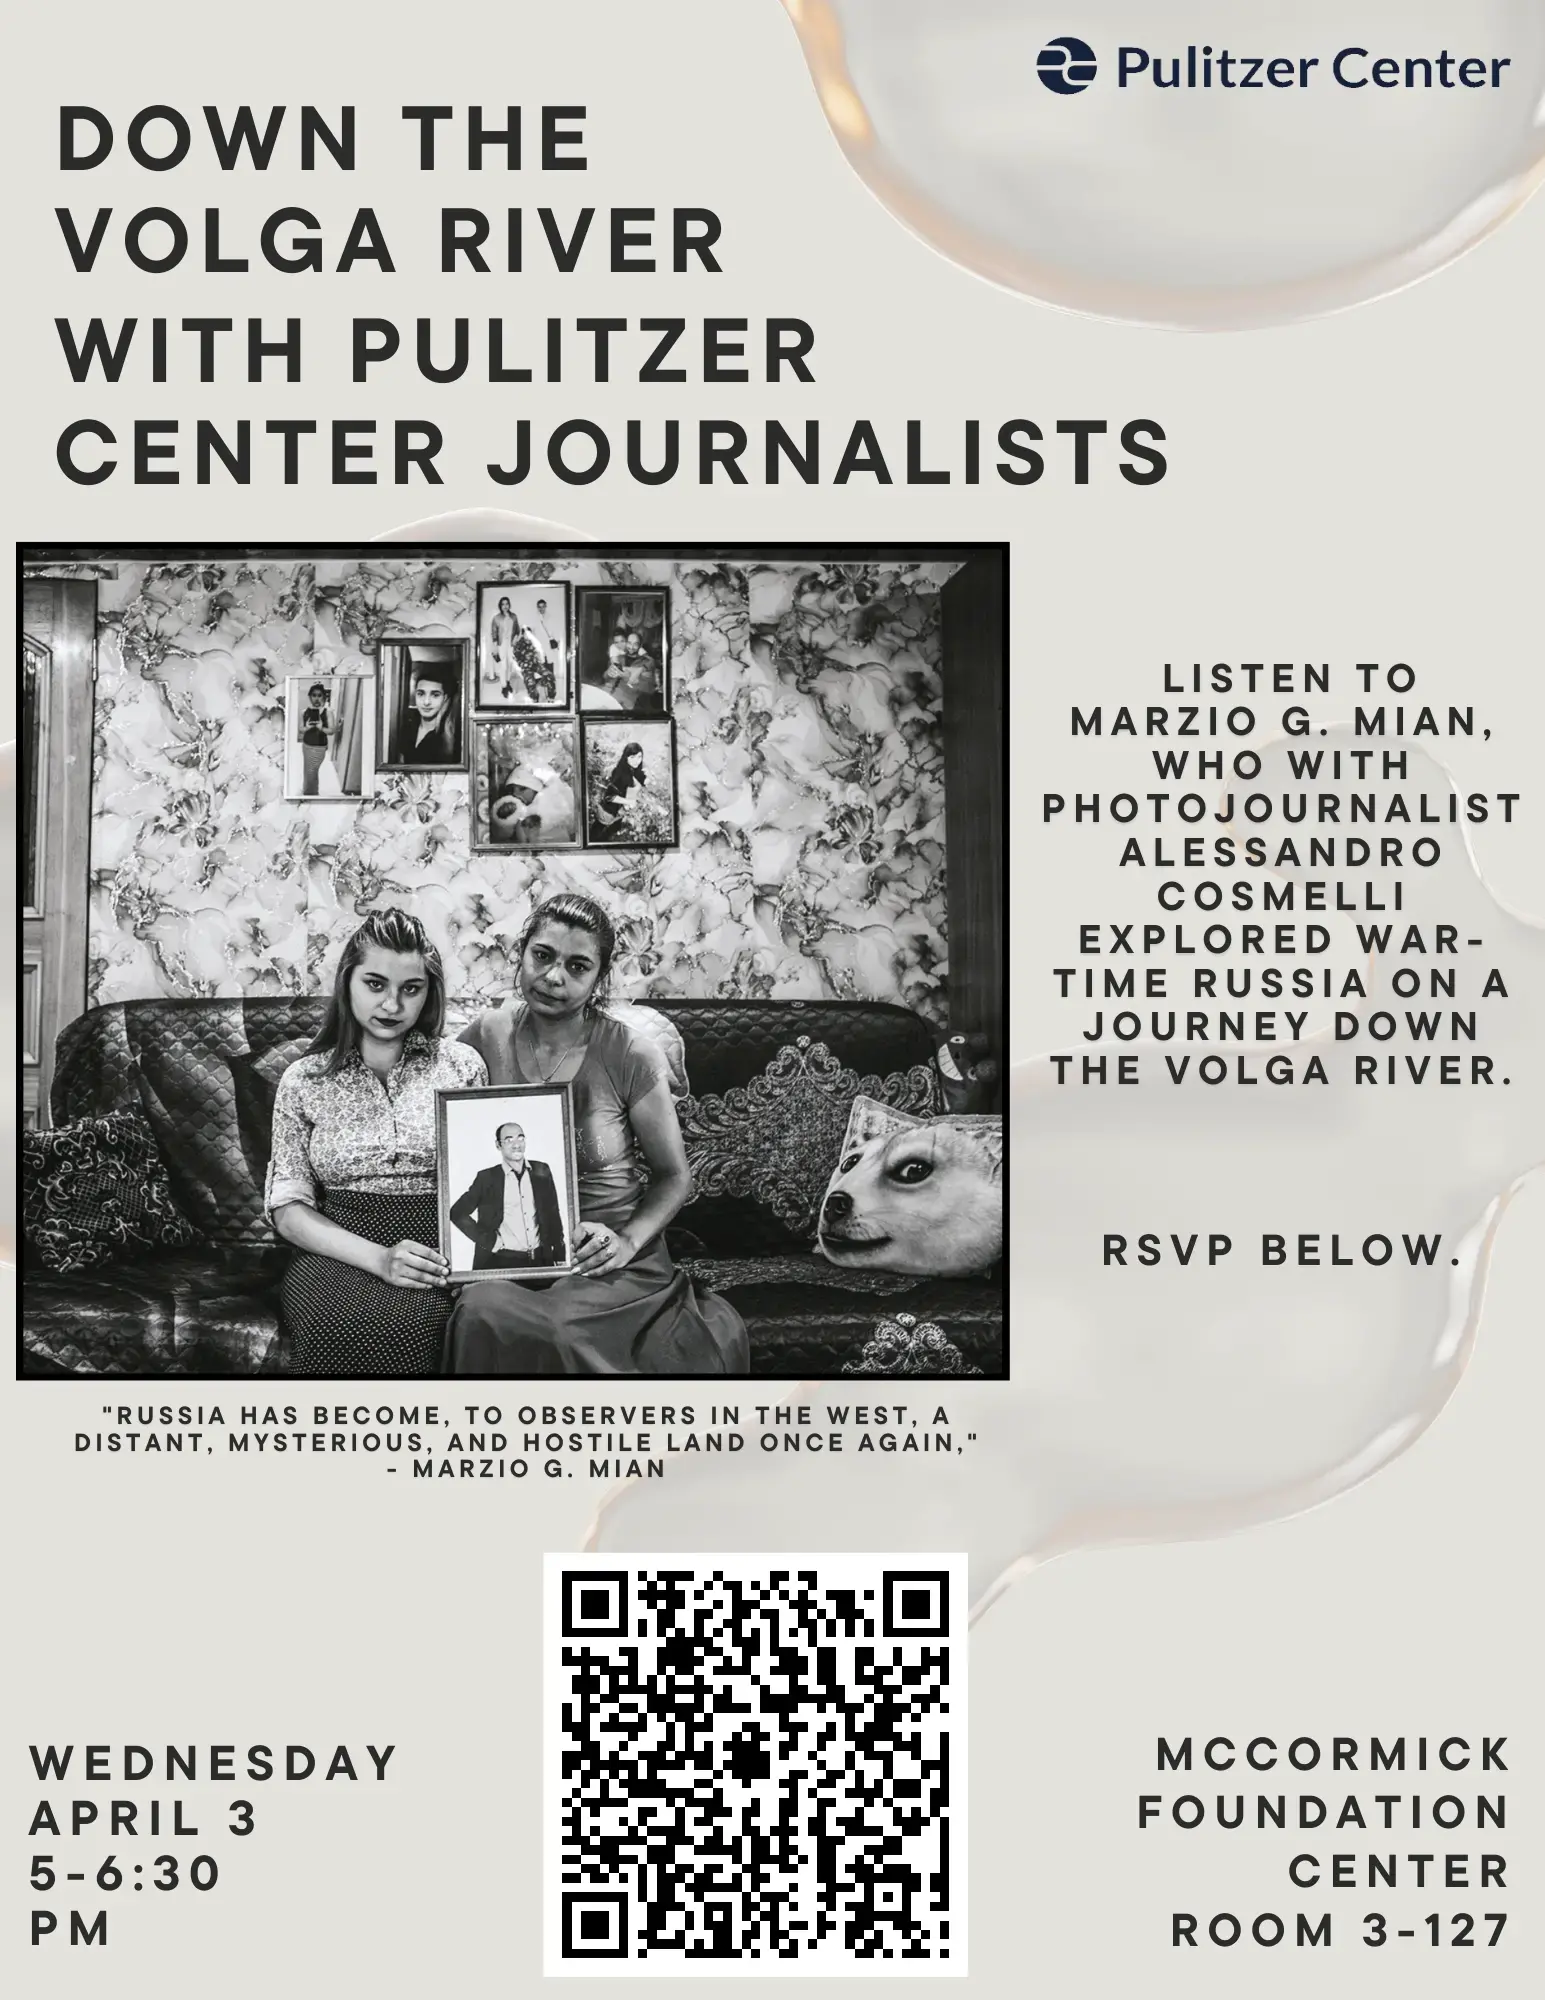 Flyer with QR code. Photograph of two girls sitting on a sofa, displaying a photograph of a man. Text: Down the Volga River with Pulitzer Center Journalists. Listen to Marzio G. Mian who with photojournalist Alessandro Cosmelli explored war-time Russia on a journey down the Volga River. RSVP Below. Wednesday April 3, from 5 to 6 P.M. at the Mccormick Foundation Center Room 3-127